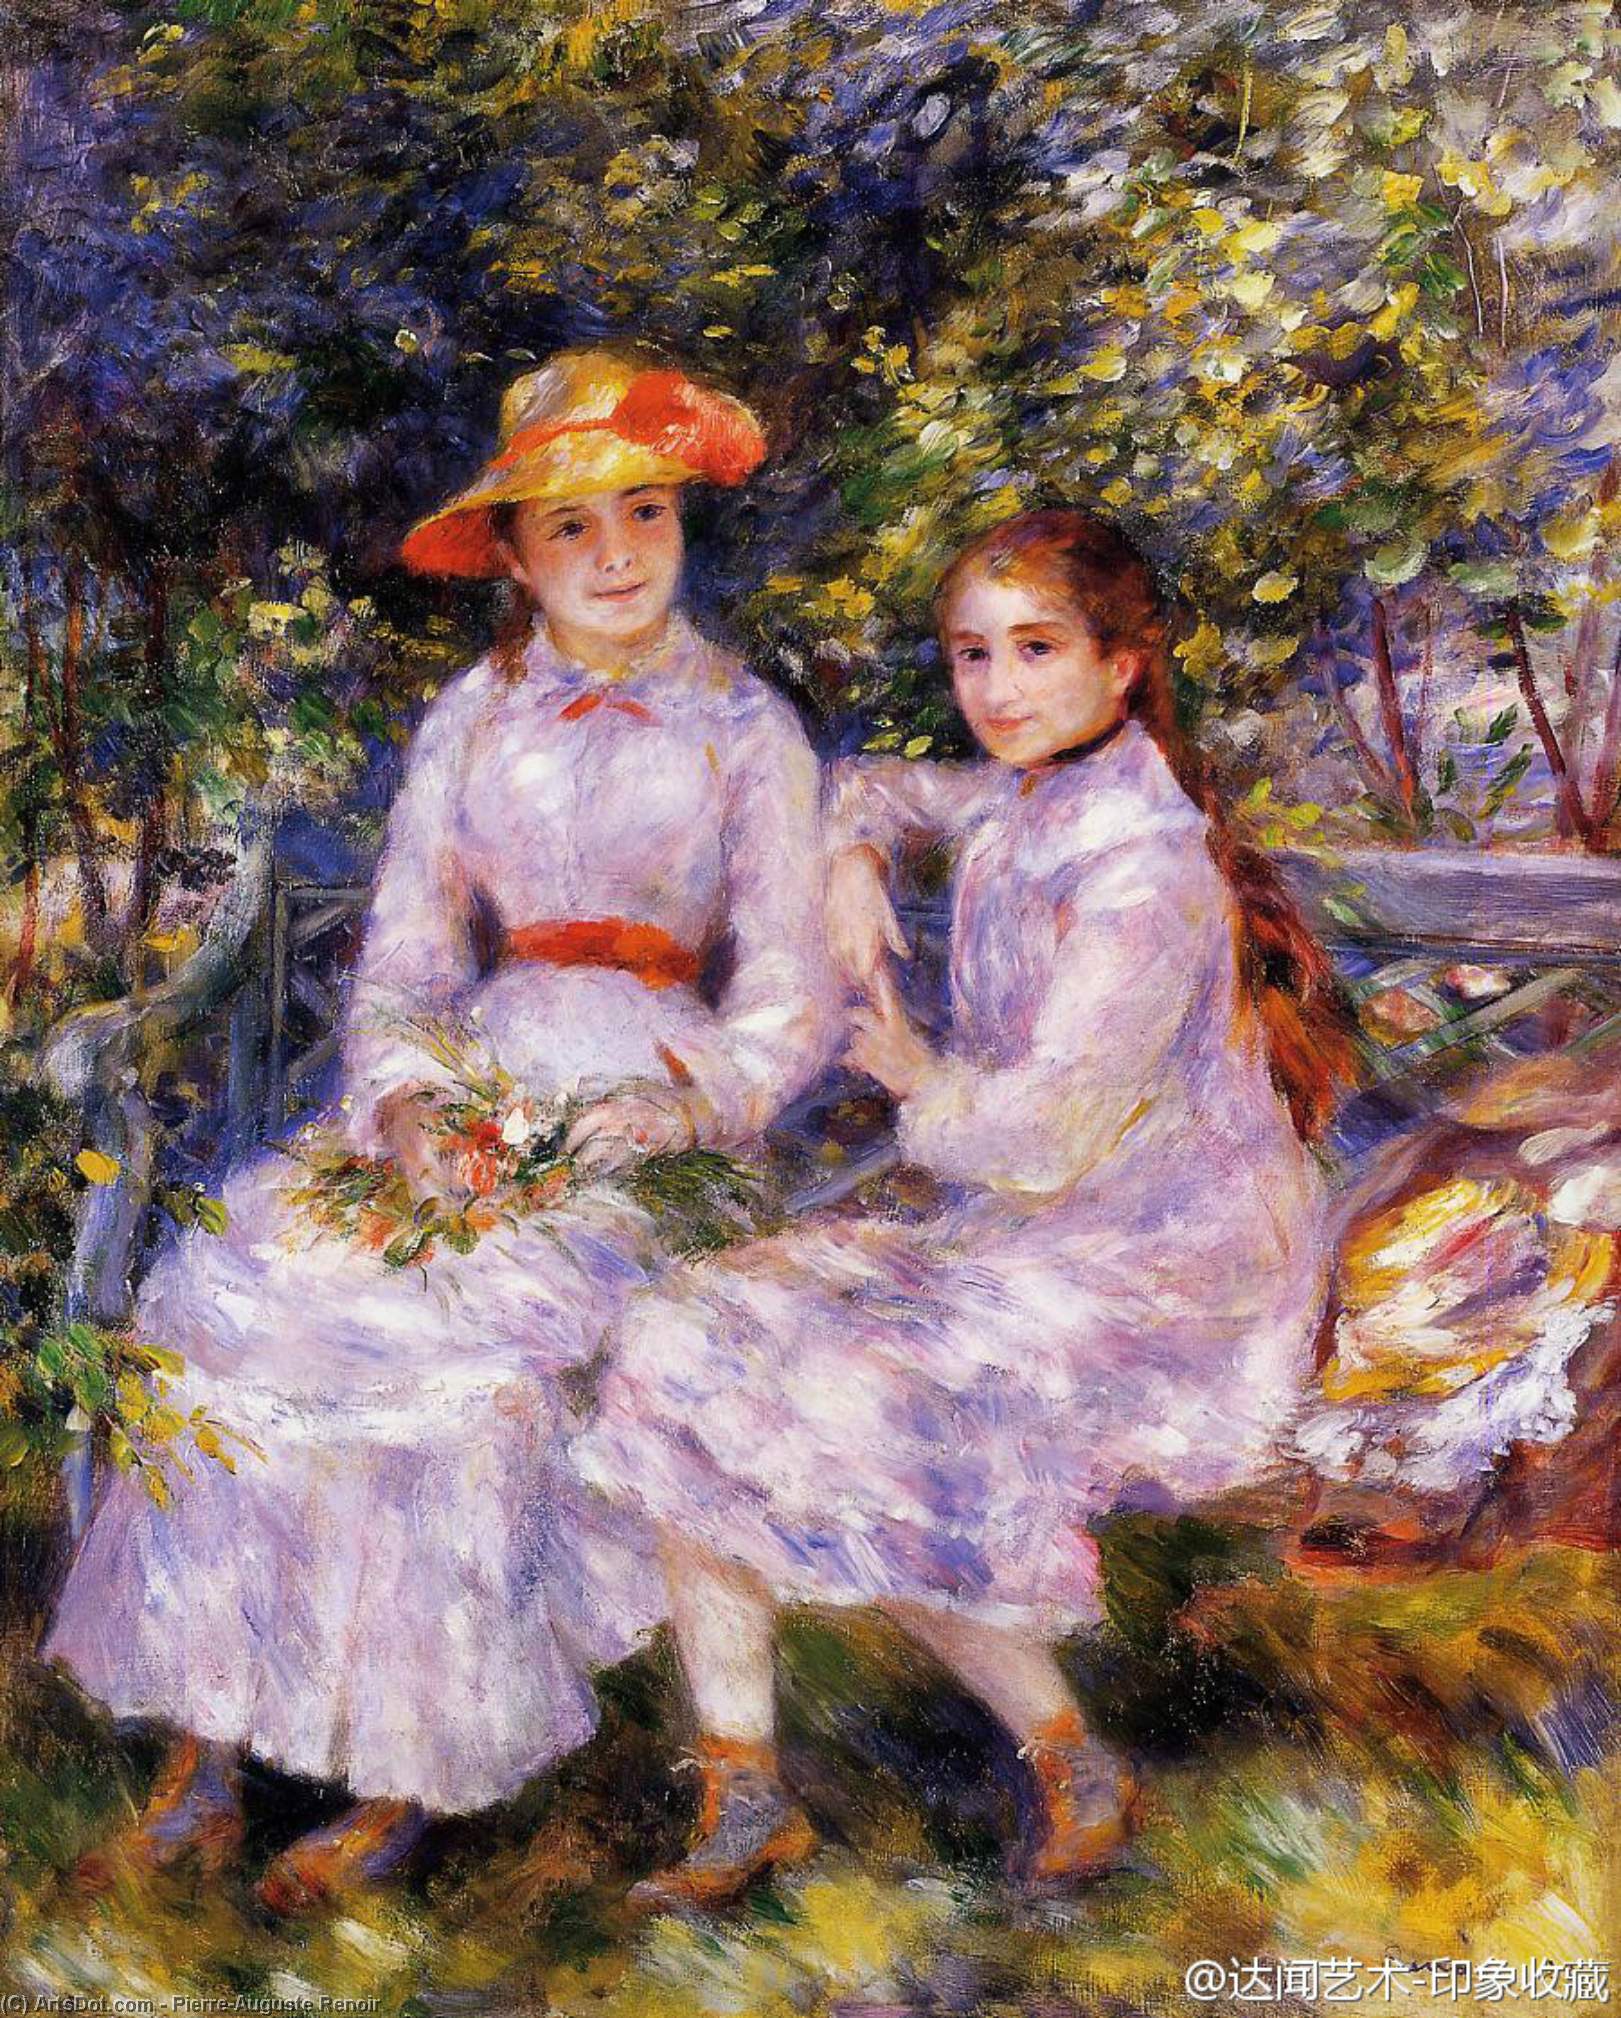 WikiOO.org - دایره المعارف هنرهای زیبا - نقاشی، آثار هنری Pierre-Auguste Renoir - The Daughters of Paul Durand-Ruel (also known as Marie-Theresa and Jeanne)